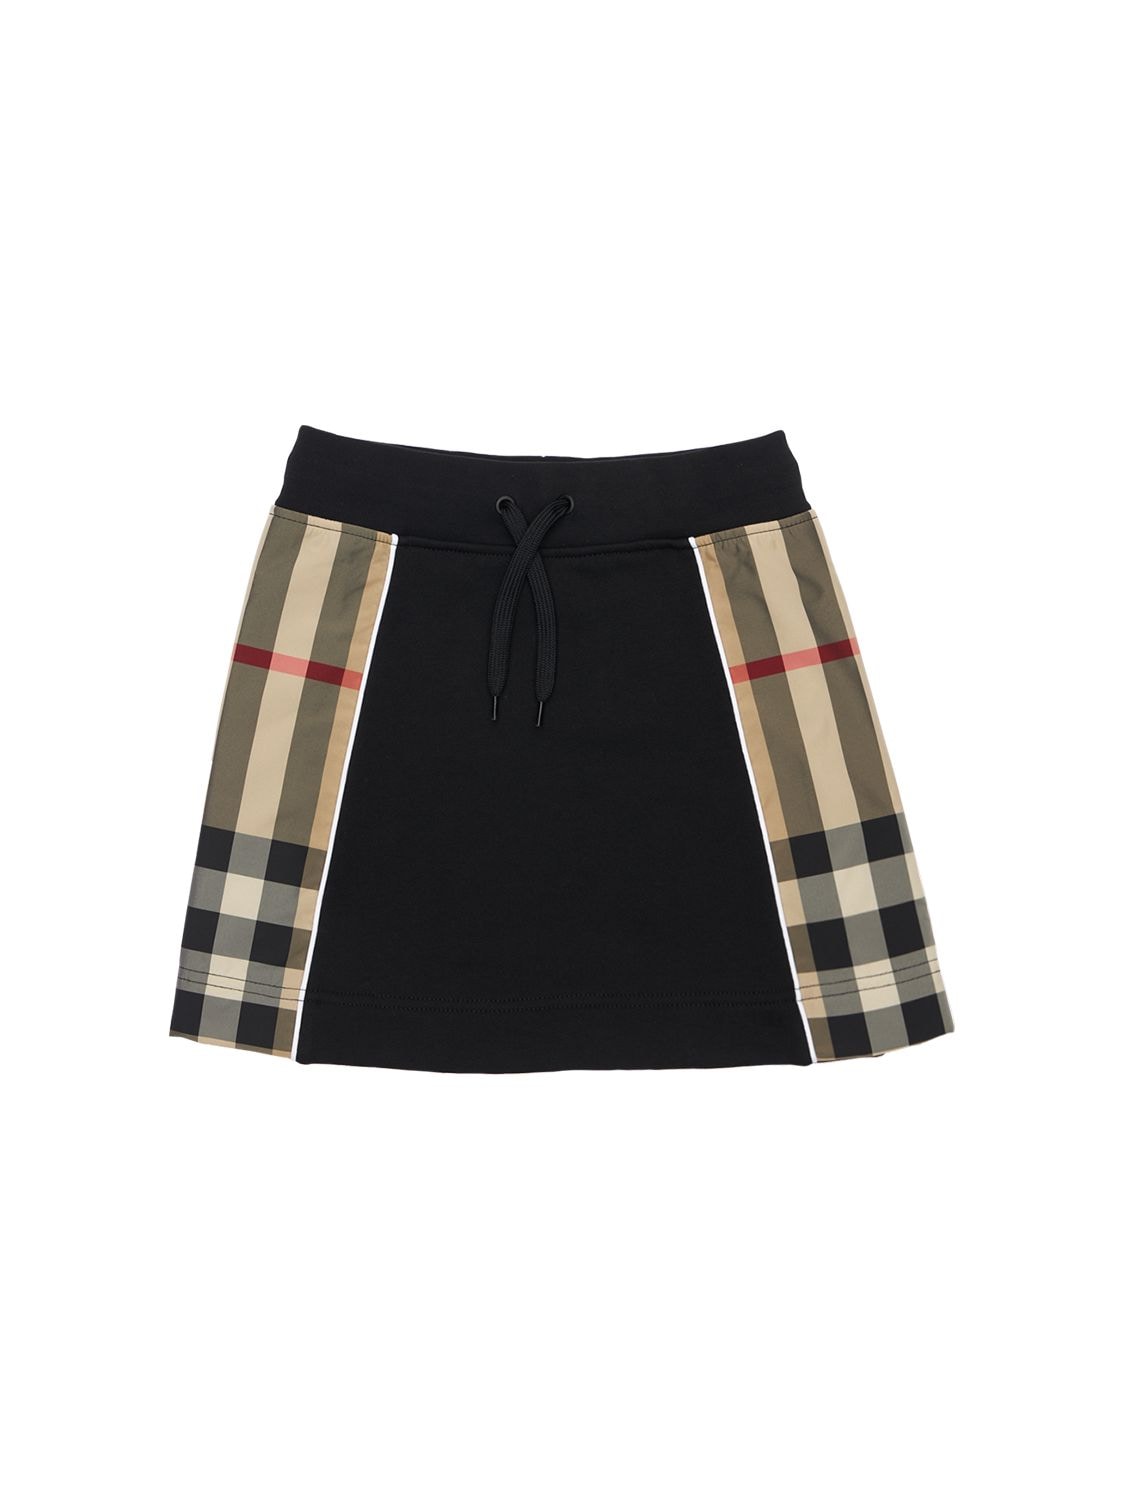 Cotton Skirt W/ Check Bands